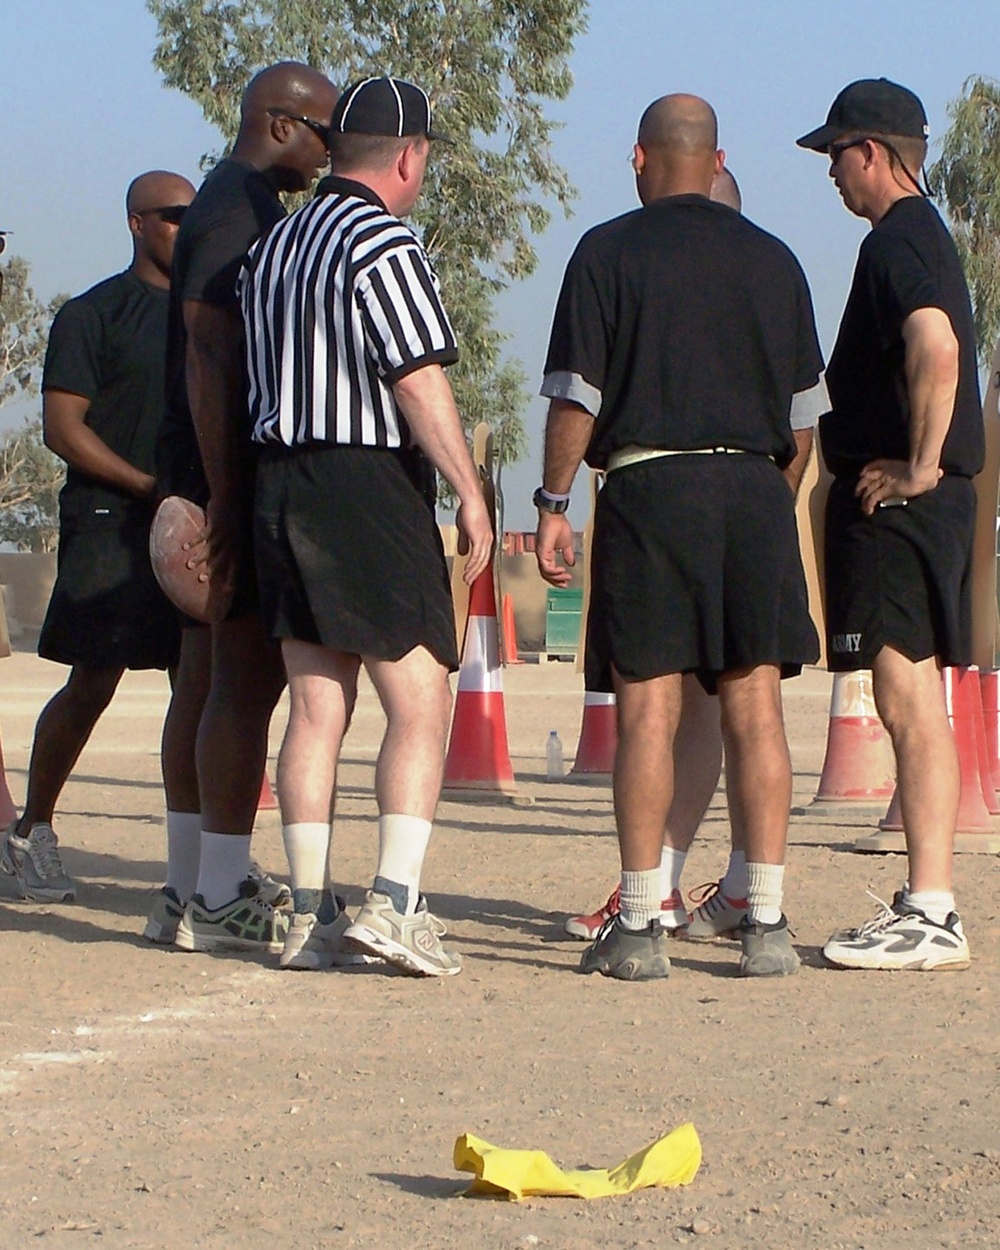 MND-B Soldiers Learn to Make Call by Completing Football Officiating Course